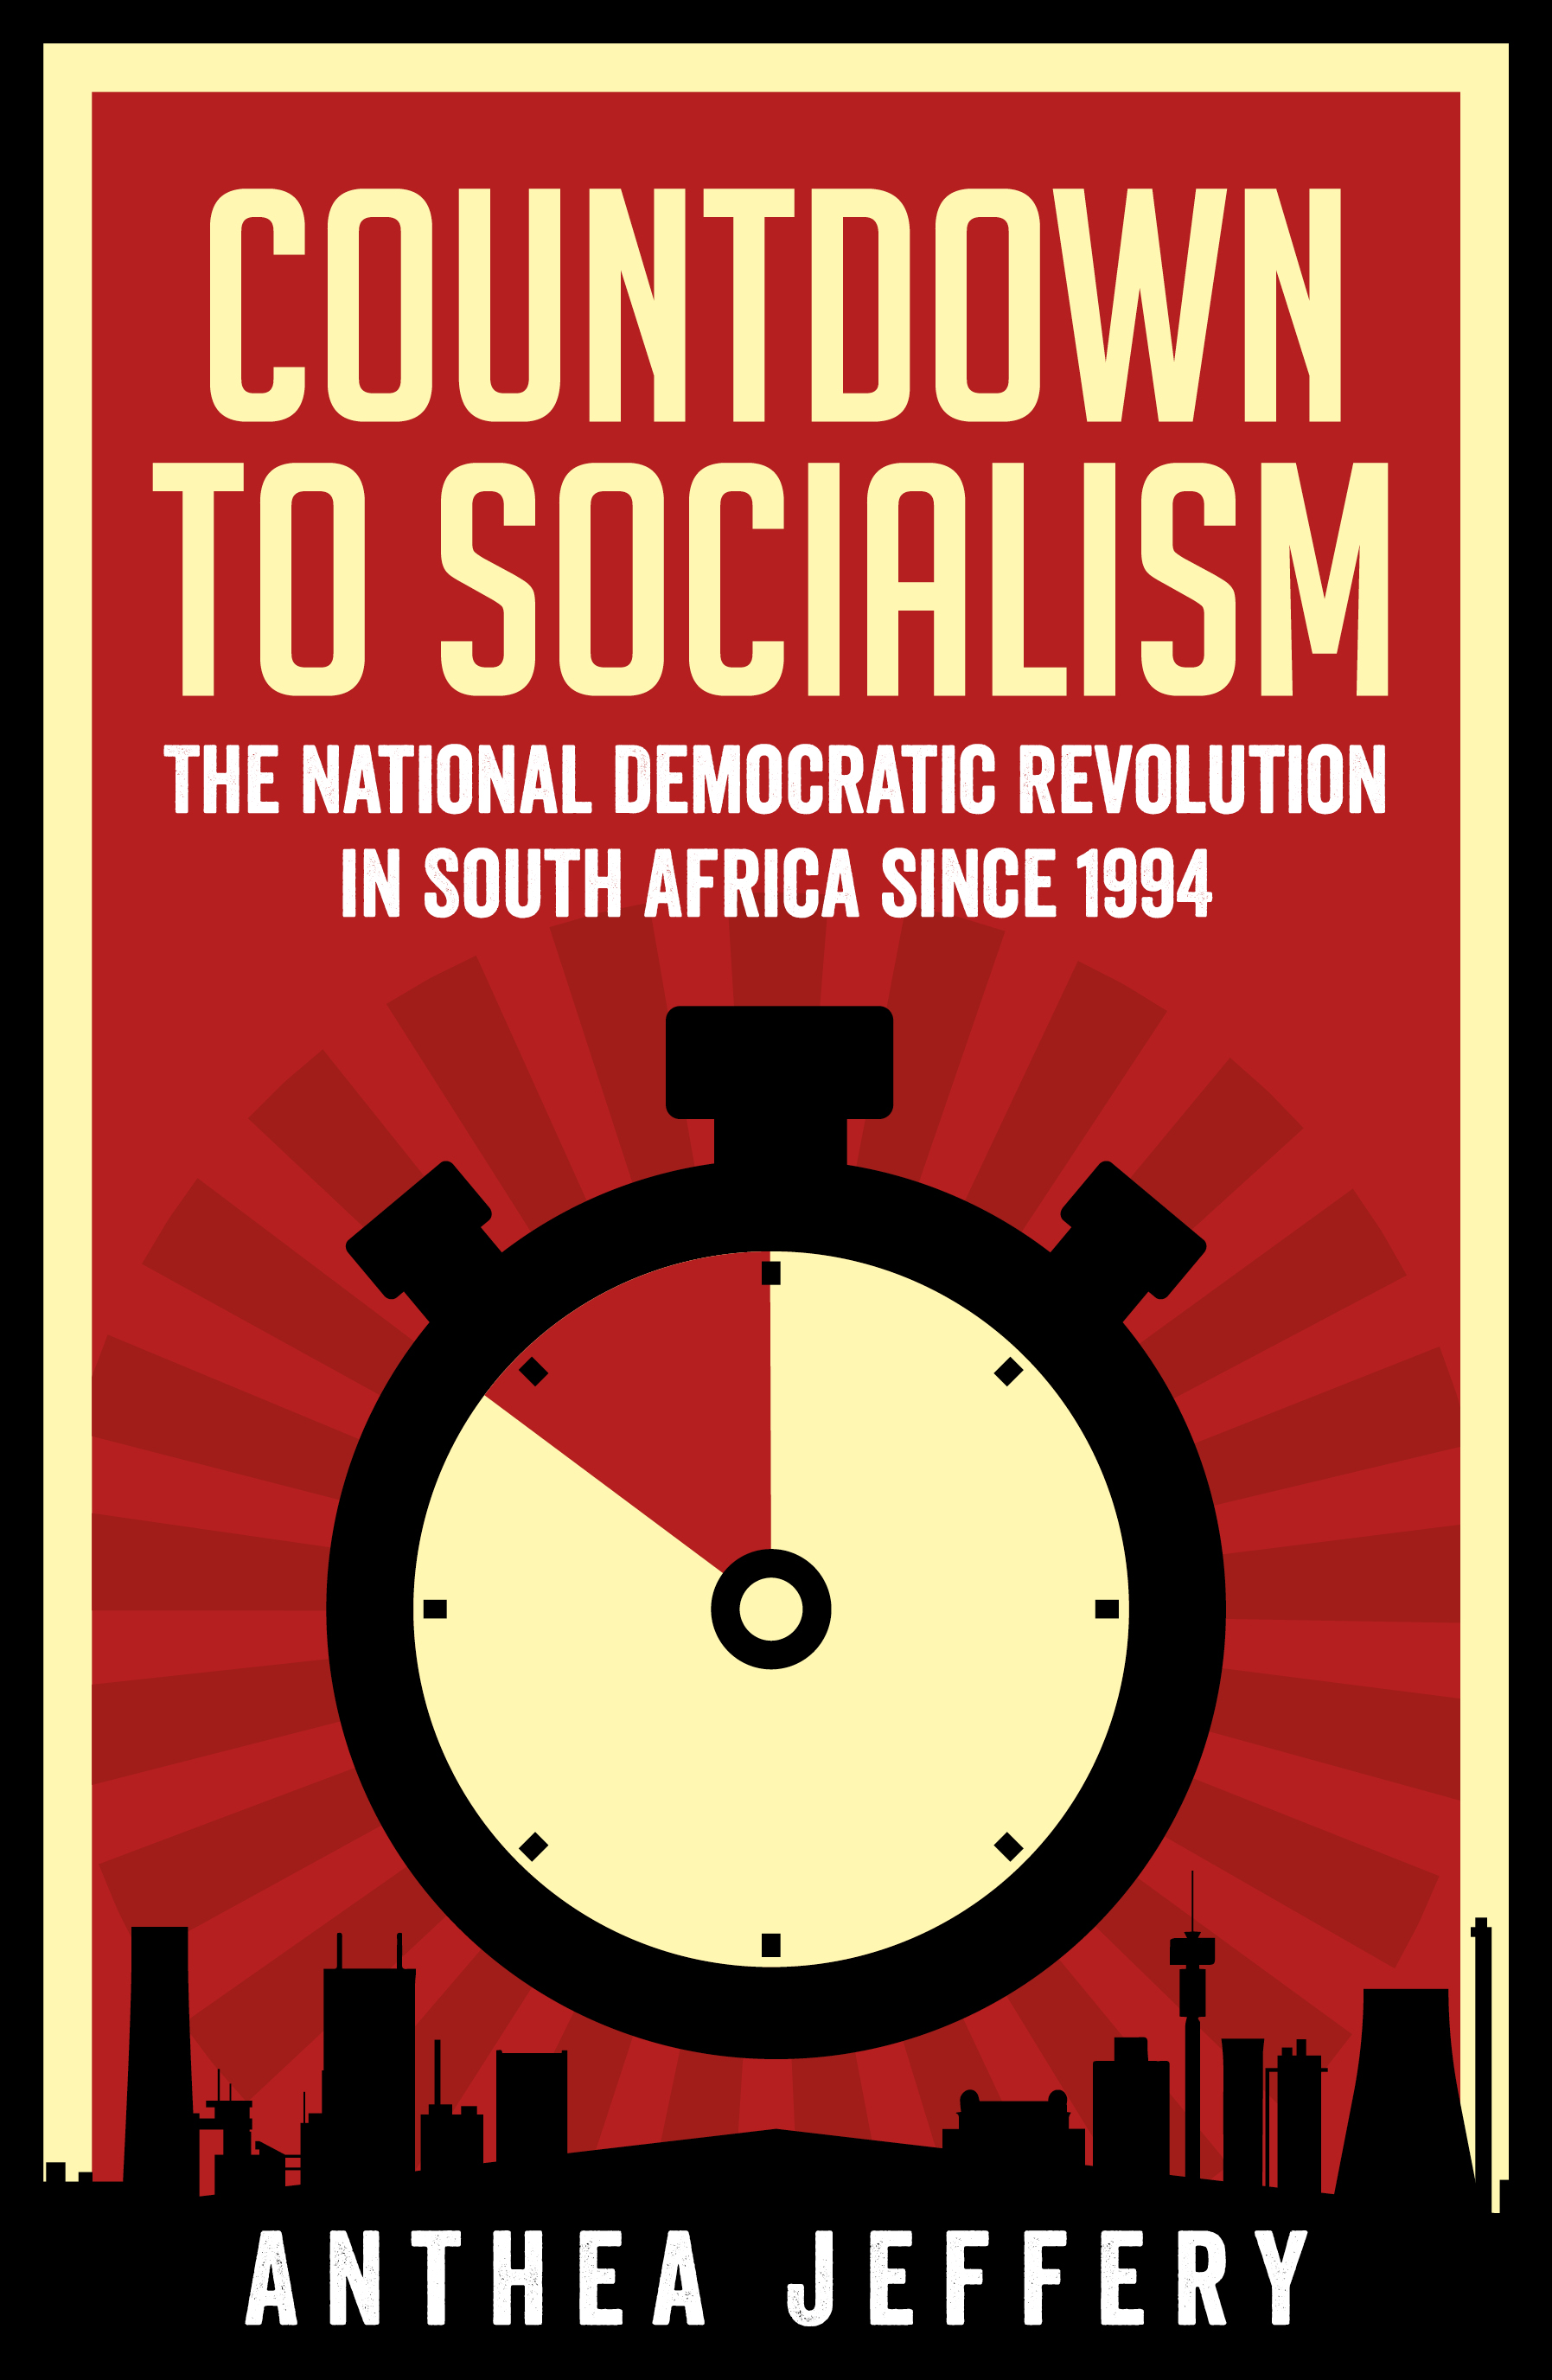 COUNTDOWN TO SOCIALISM